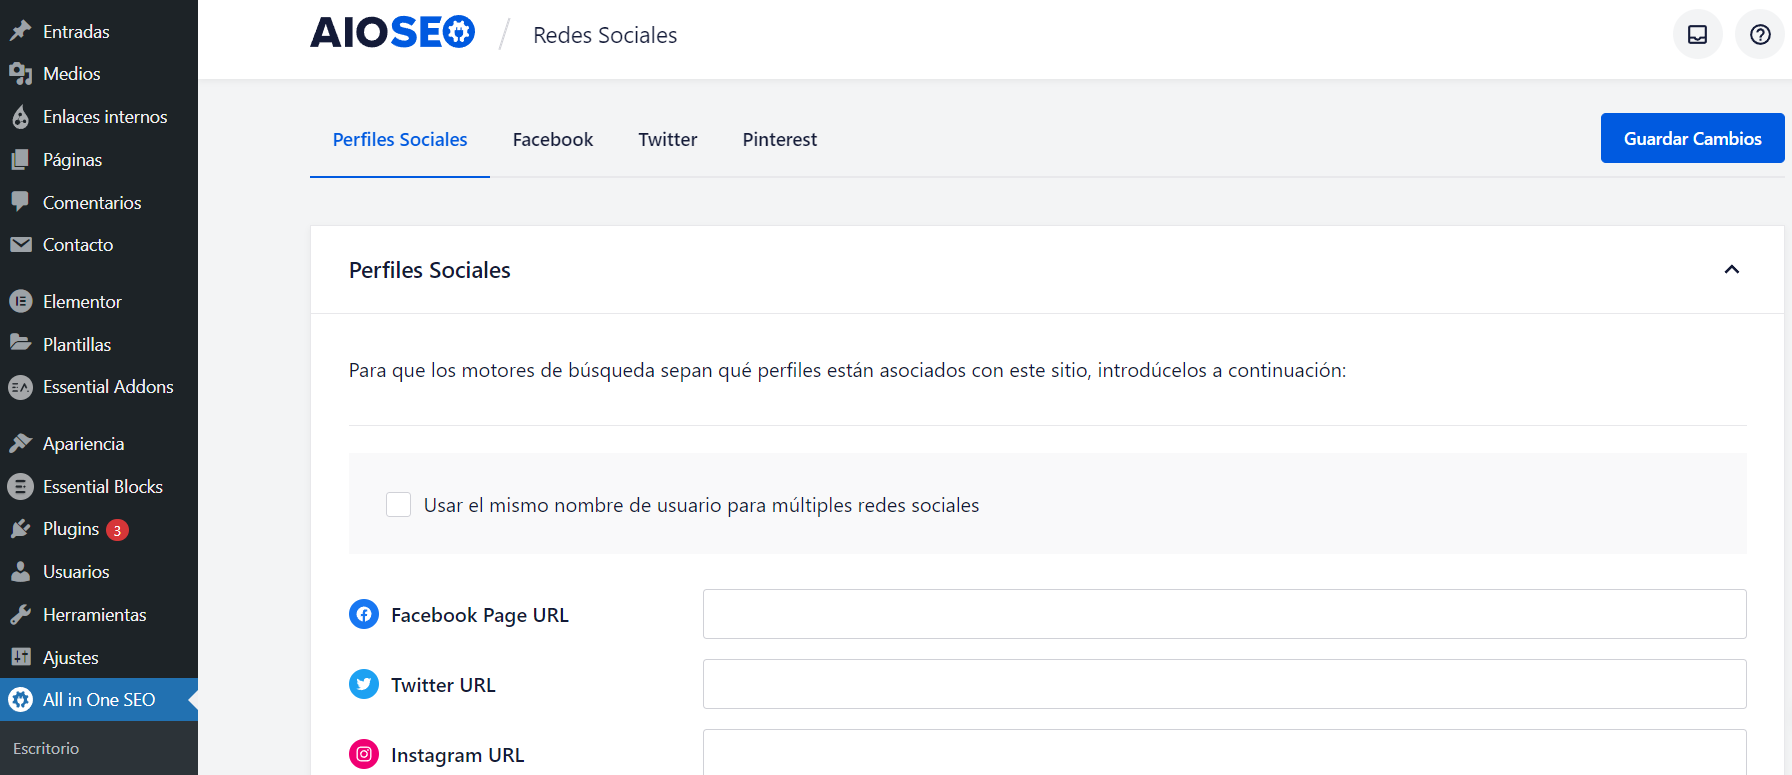 all in one seo redes sociales